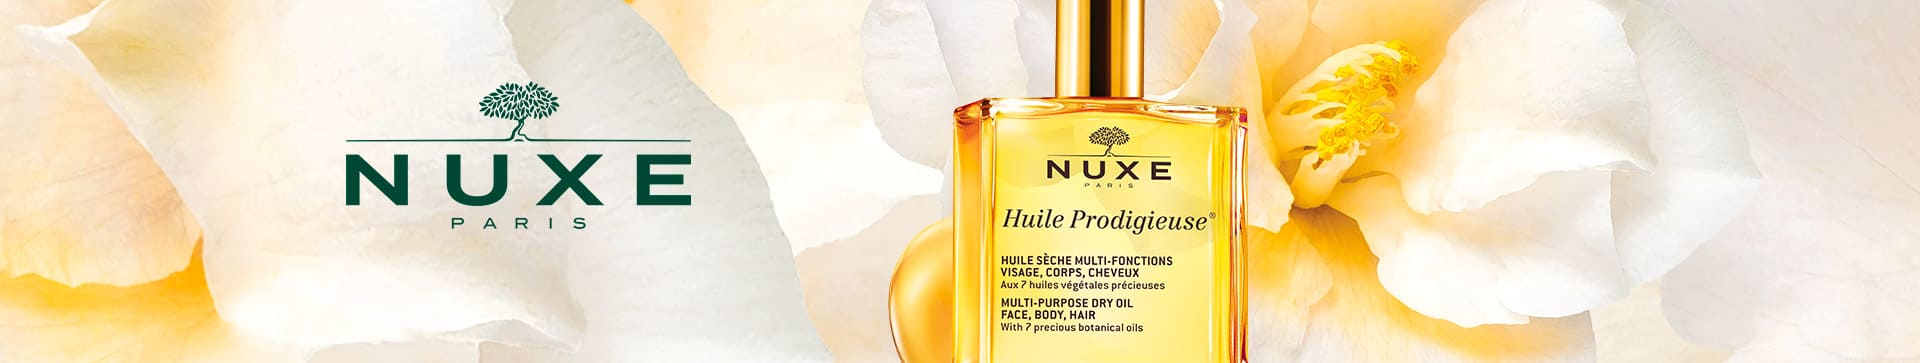 nuxe-perfumes-oils